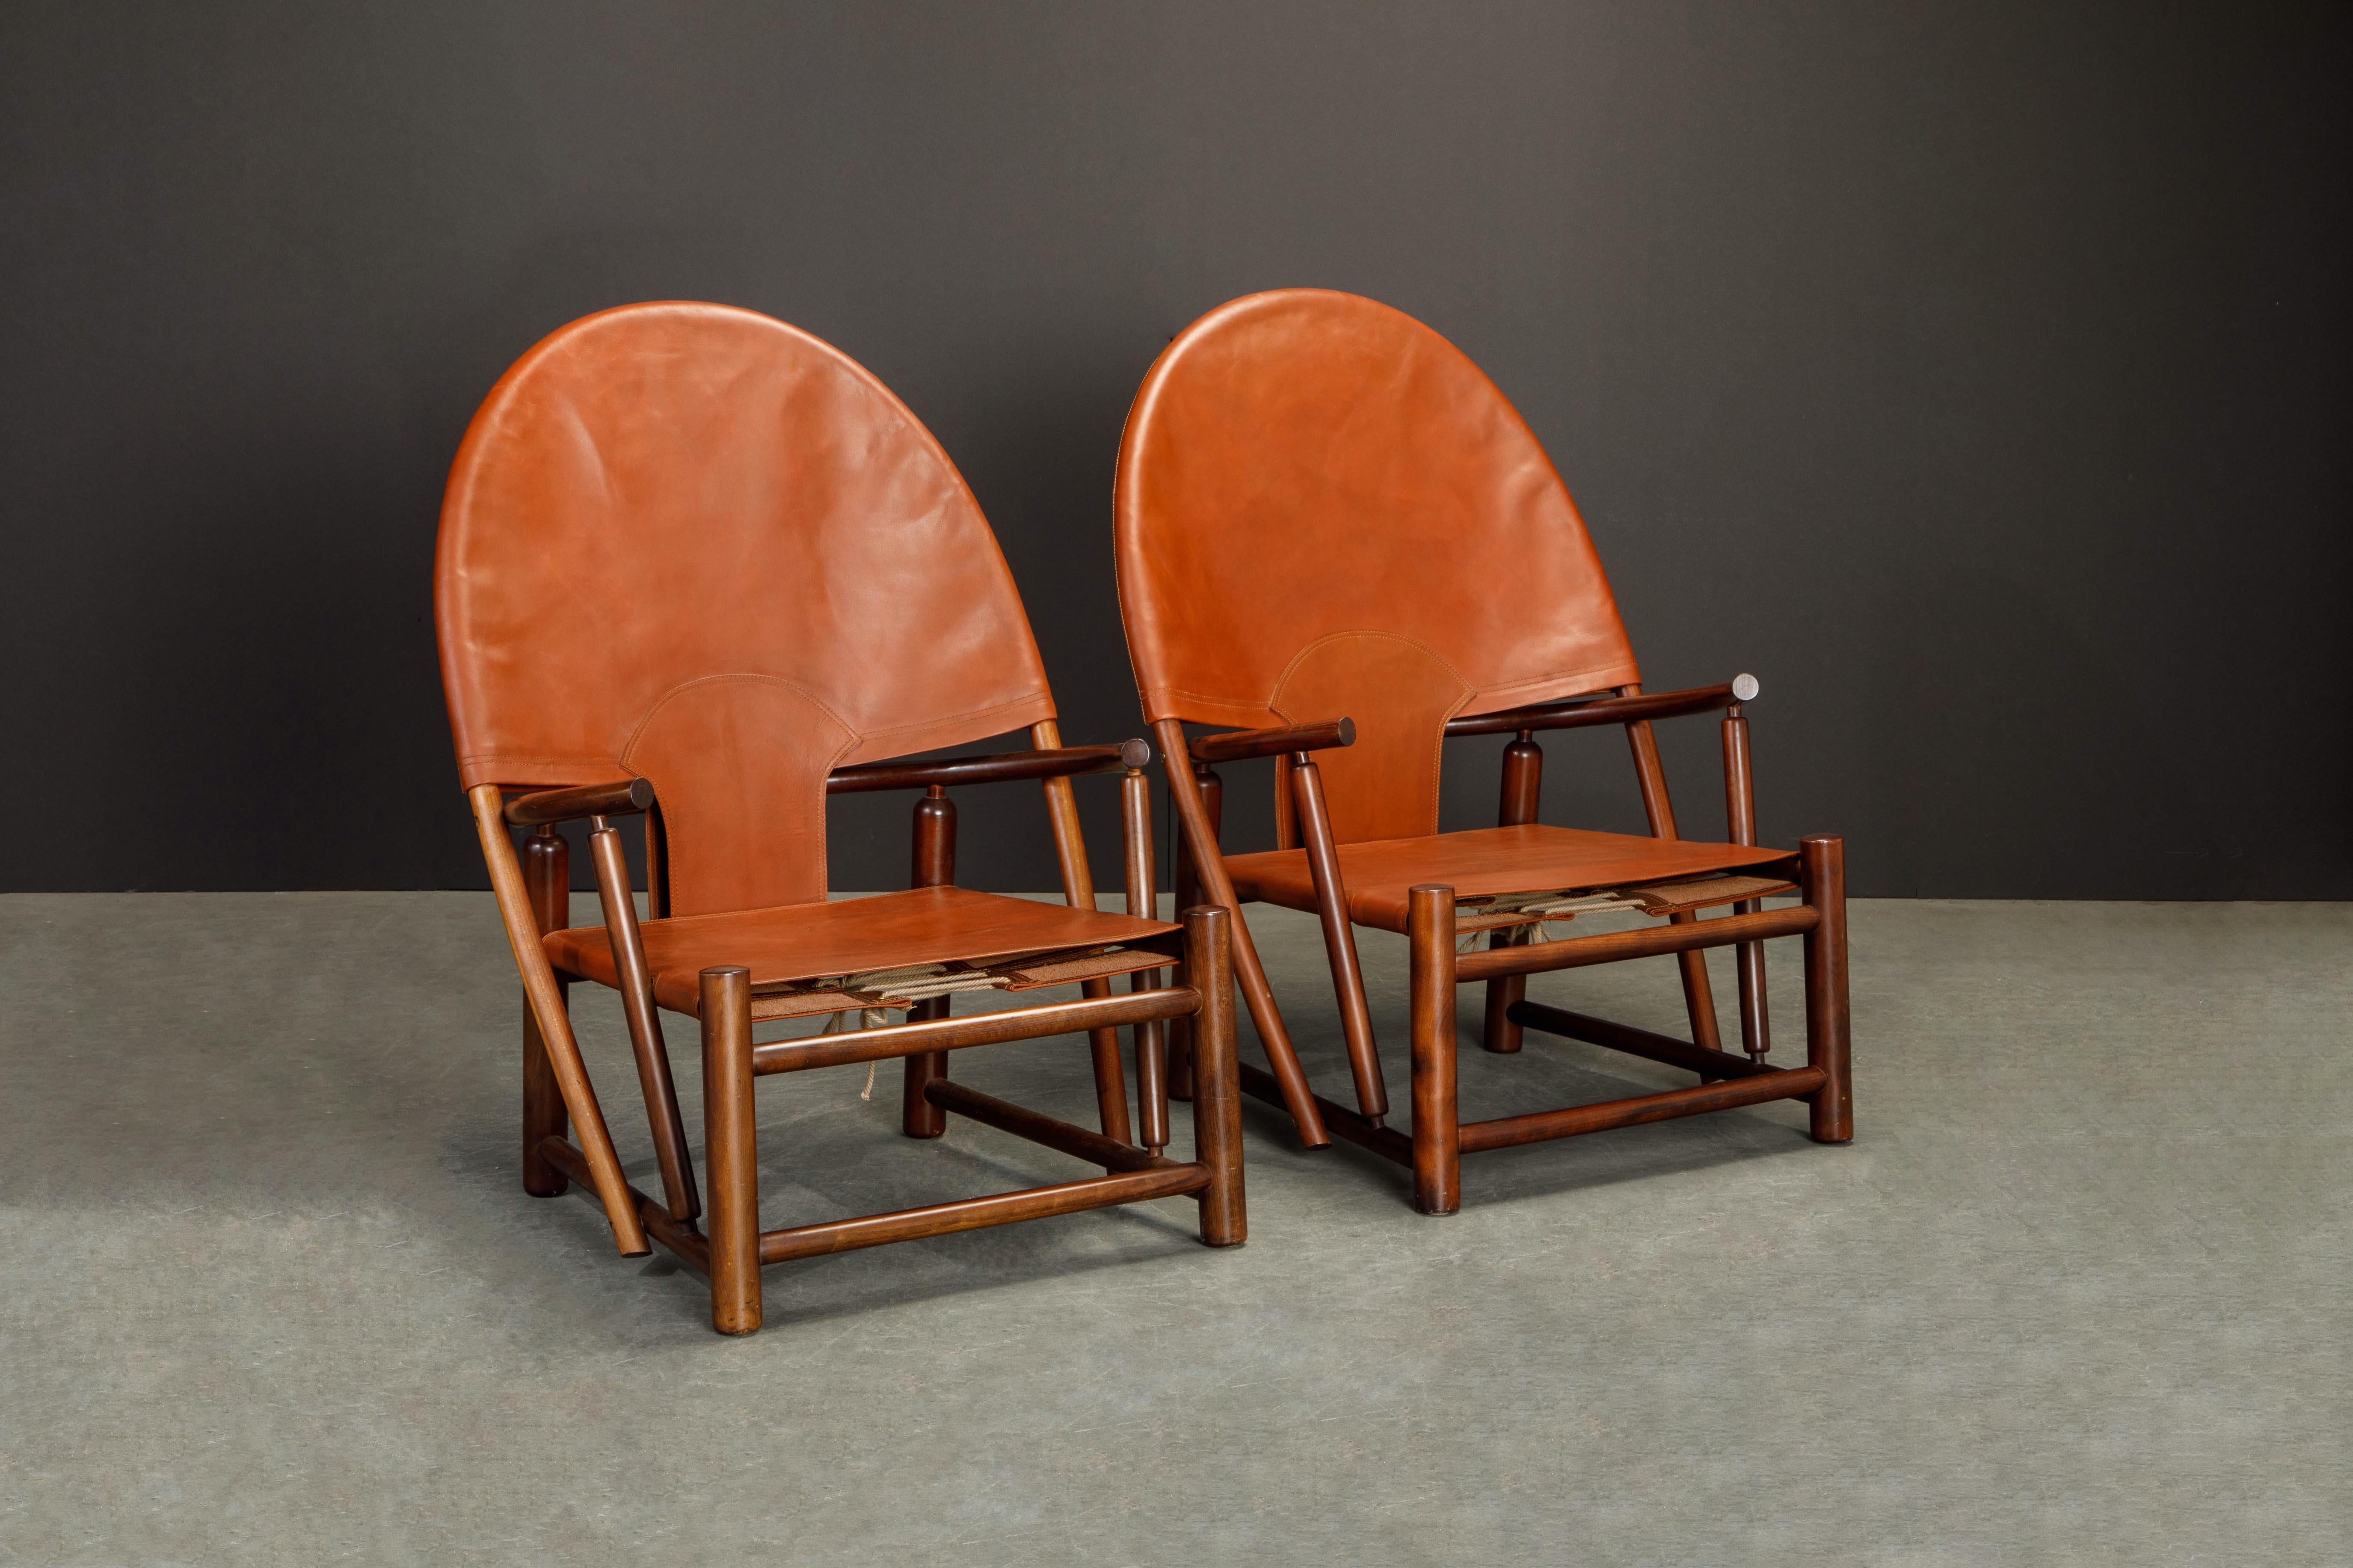 Our favorite color-way for this unique and rare design, the model G-23 'Hoop' lounge chairs by Piero Palange and Werther Toffoloni for Germa, Italy, circa 1970 and best of all we have a matching pair. The deep brown leather slings sitting atop the